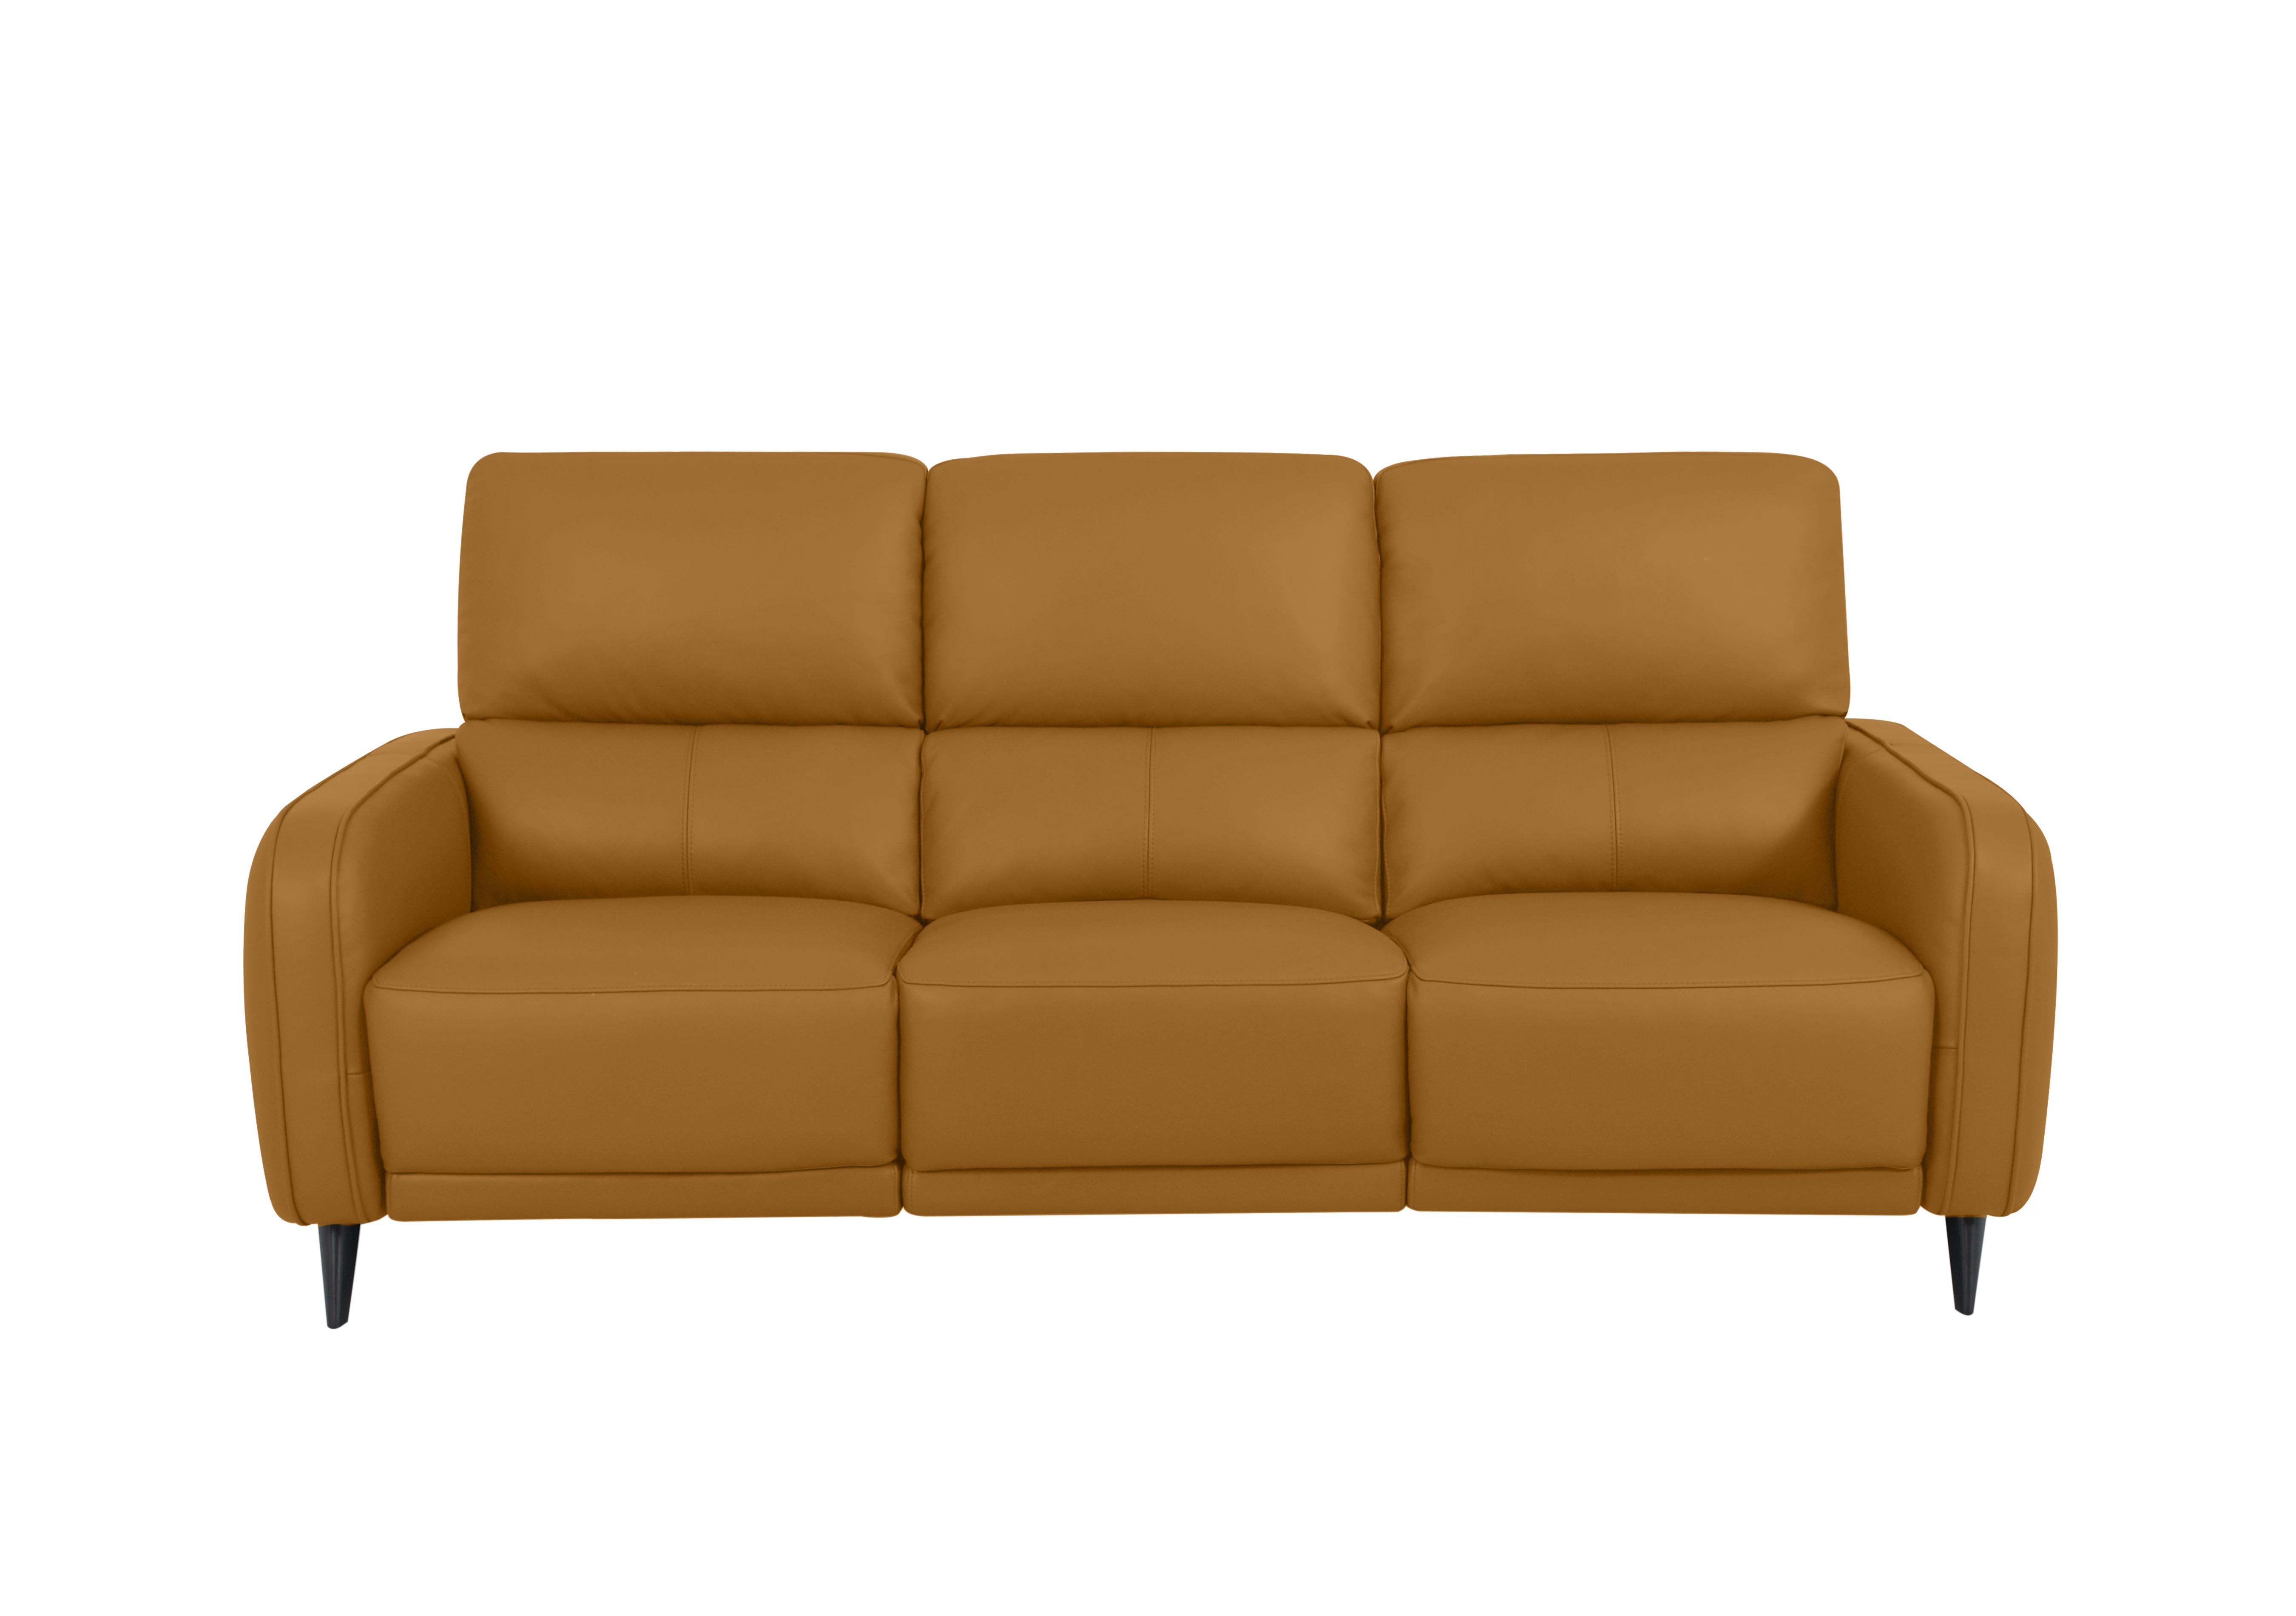 Logan 3 Seater Leather Sofa in Np-606e Honey Yellow on Furniture Village